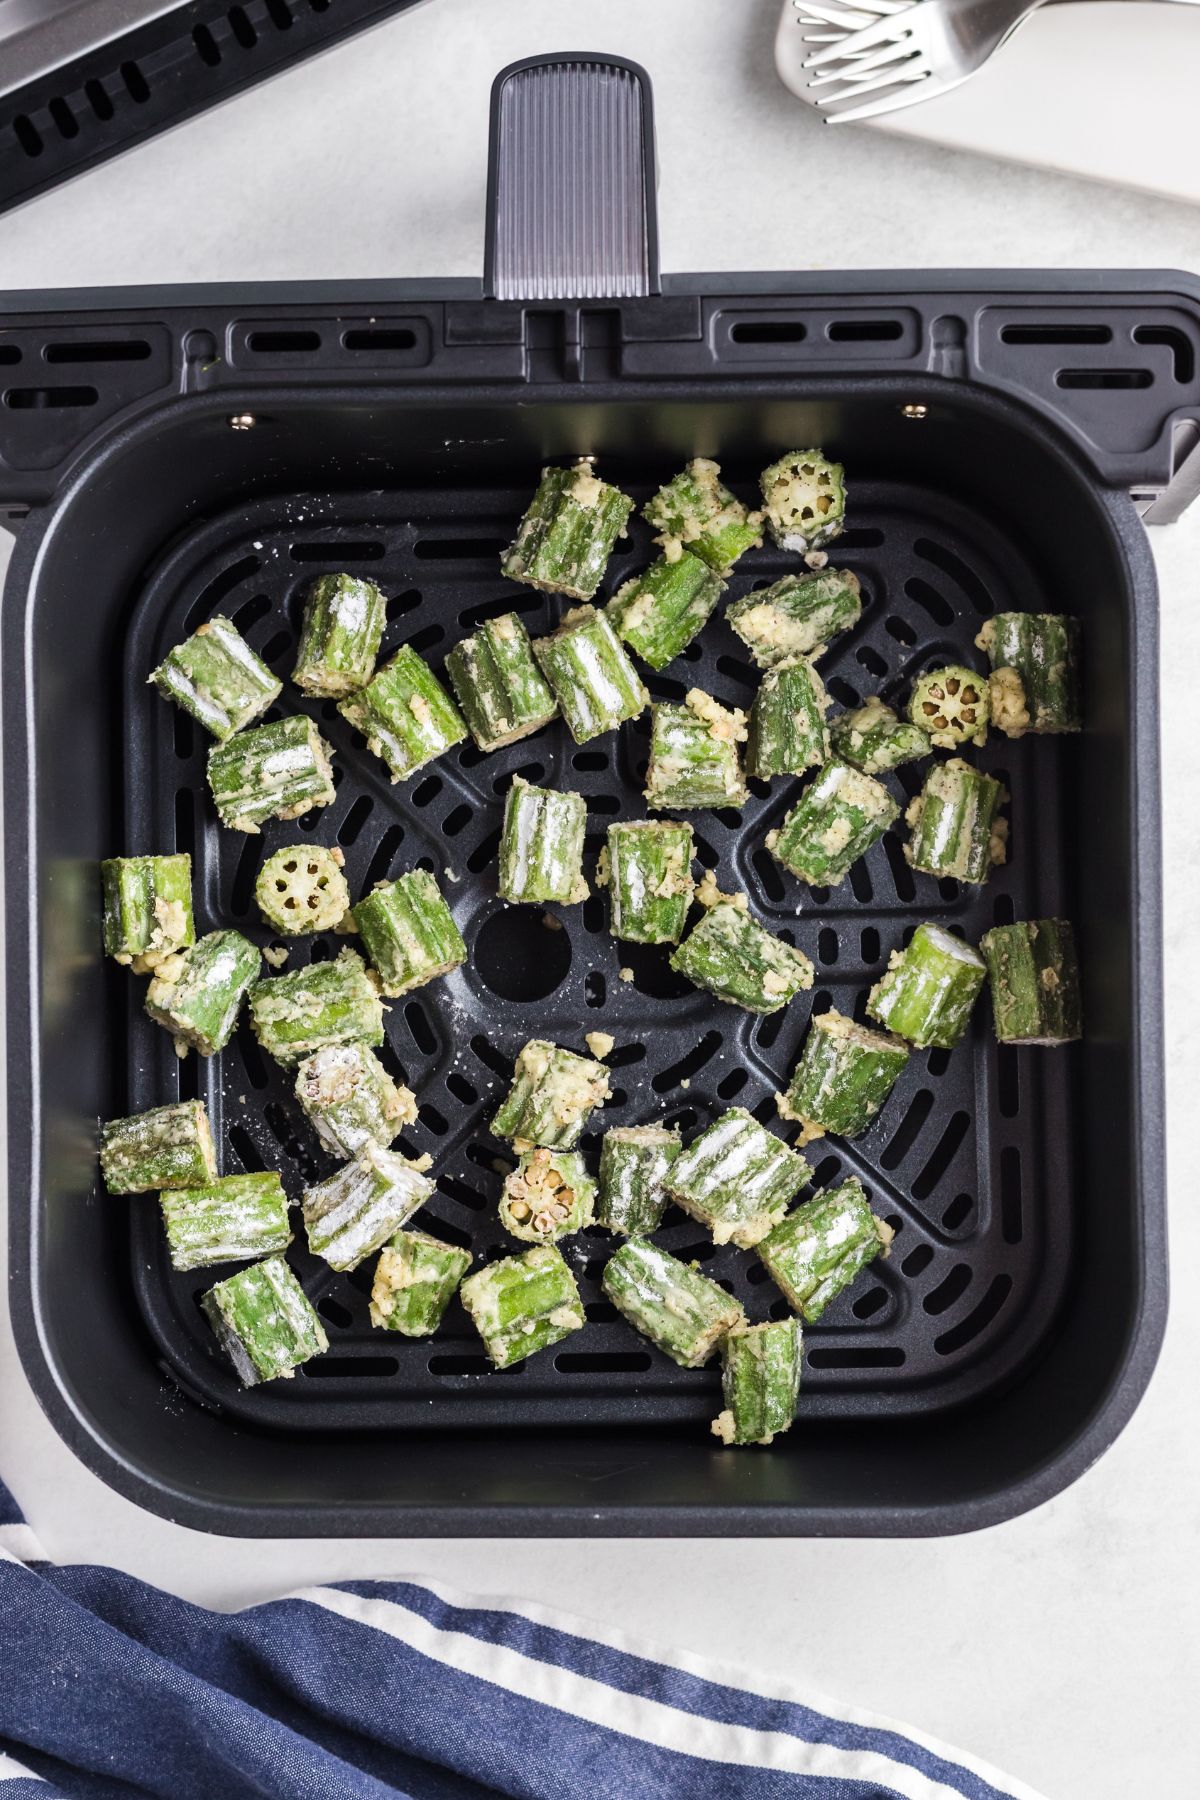 Coated okra pieces in an air fryer basket before being cooked.